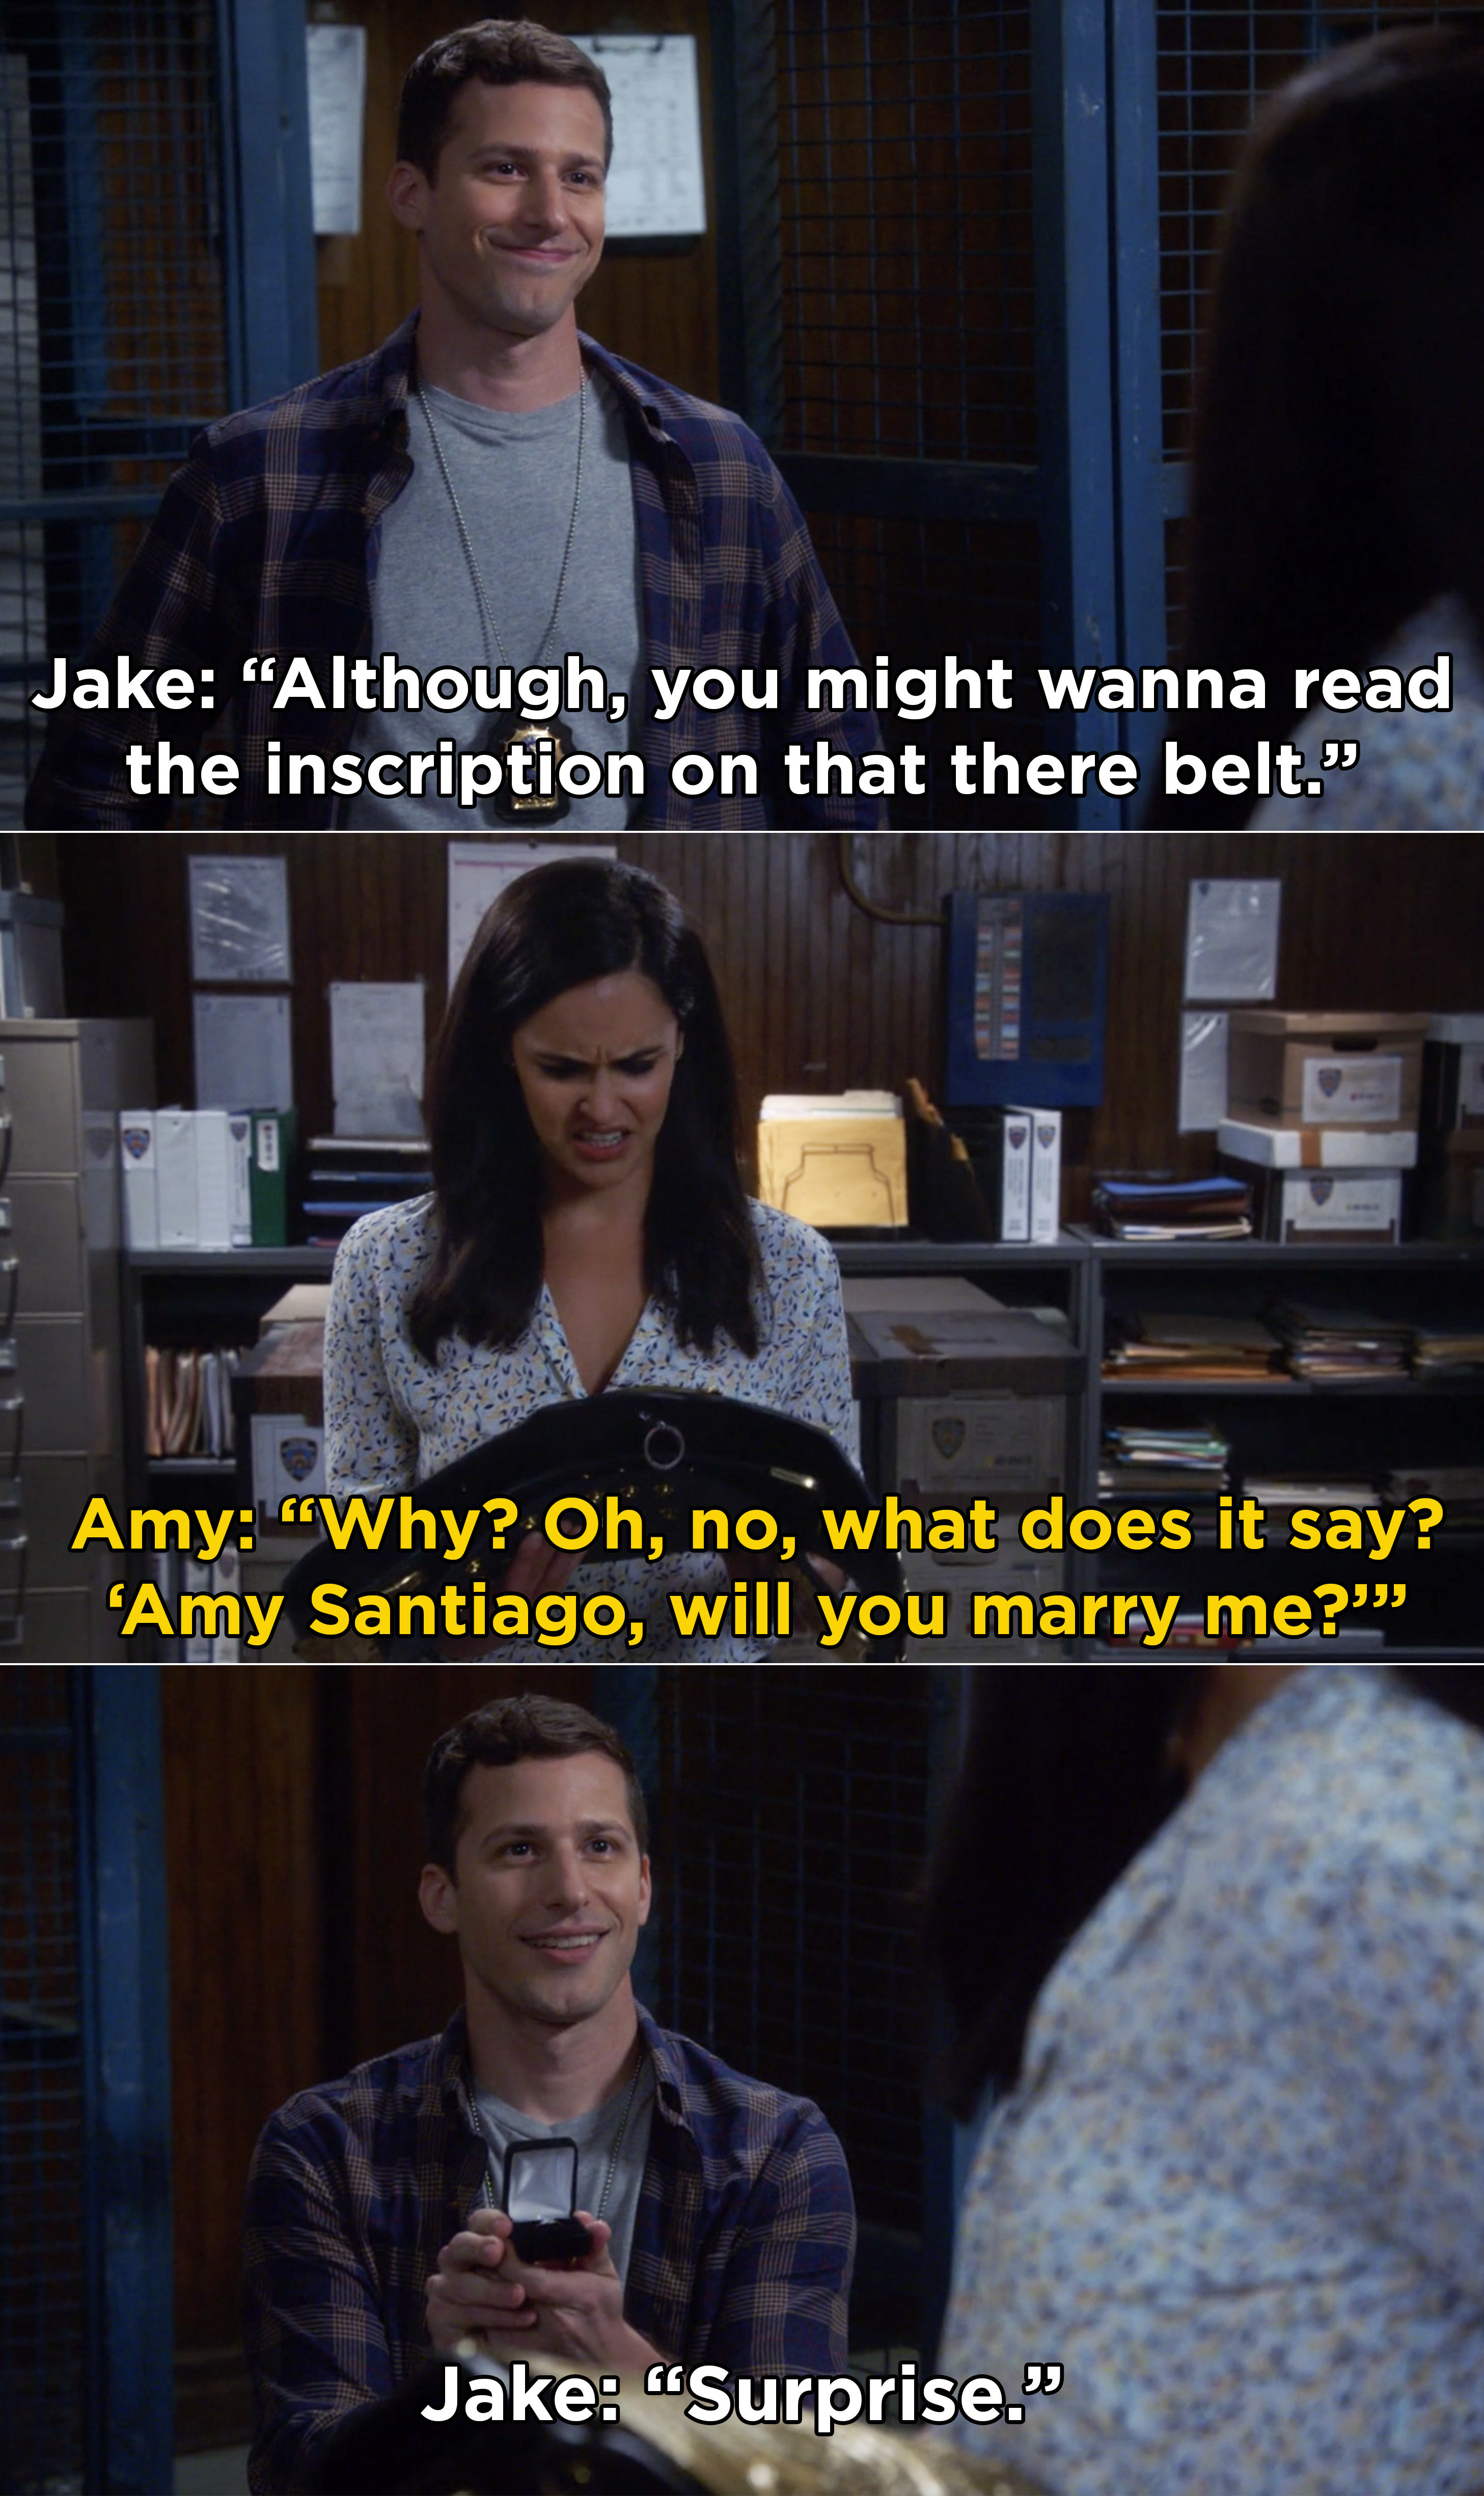 Amy reading the belt and Jake surprising her by proposing